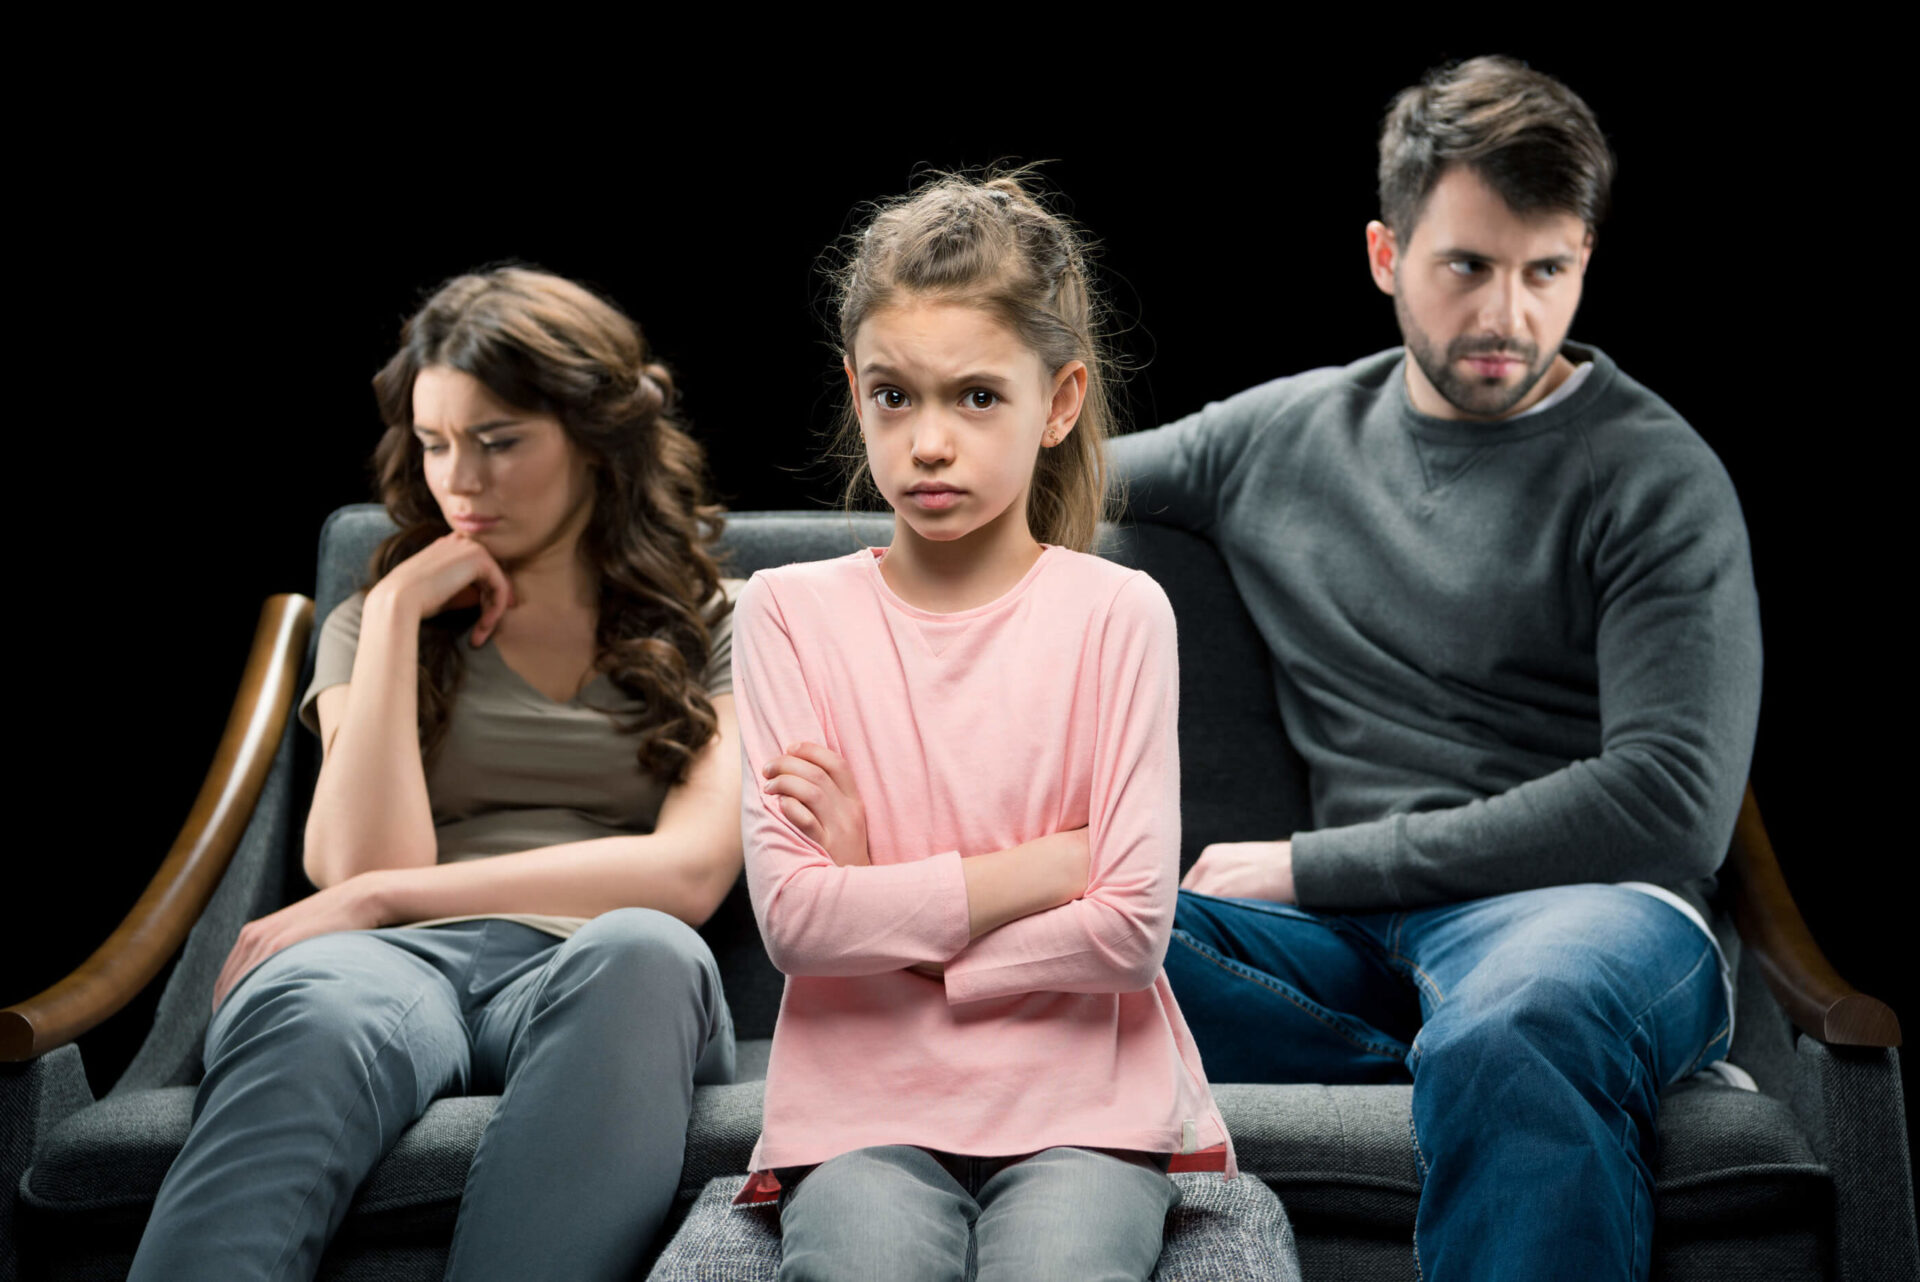 How to Find the Best Child Custody Lawyer